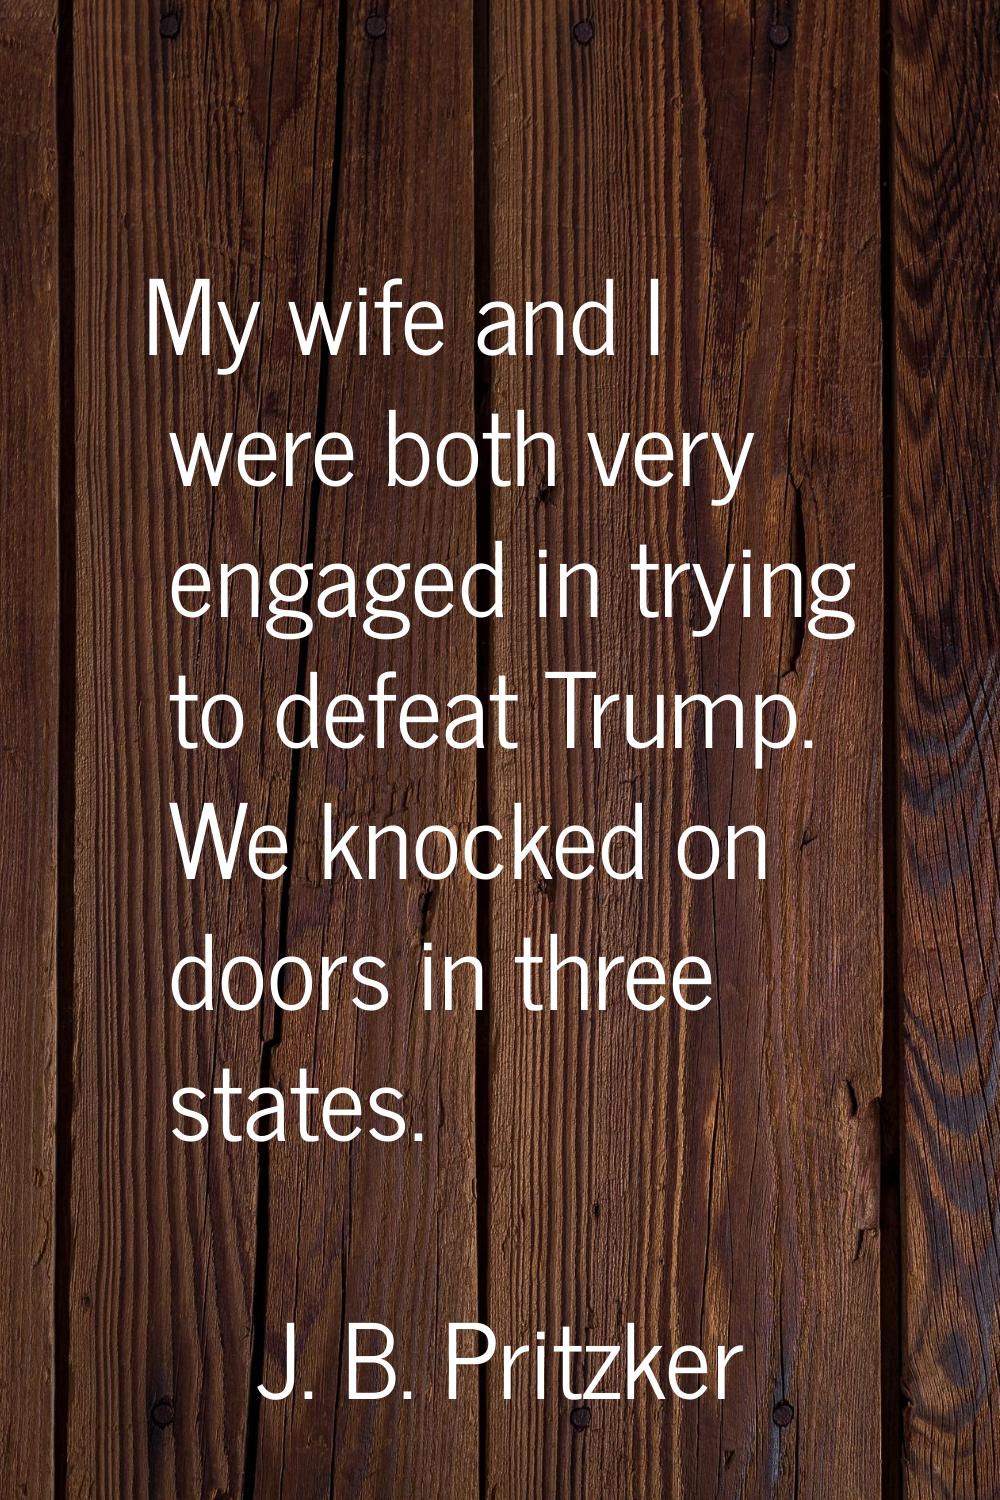 My wife and I were both very engaged in trying to defeat Trump. We knocked on doors in three states